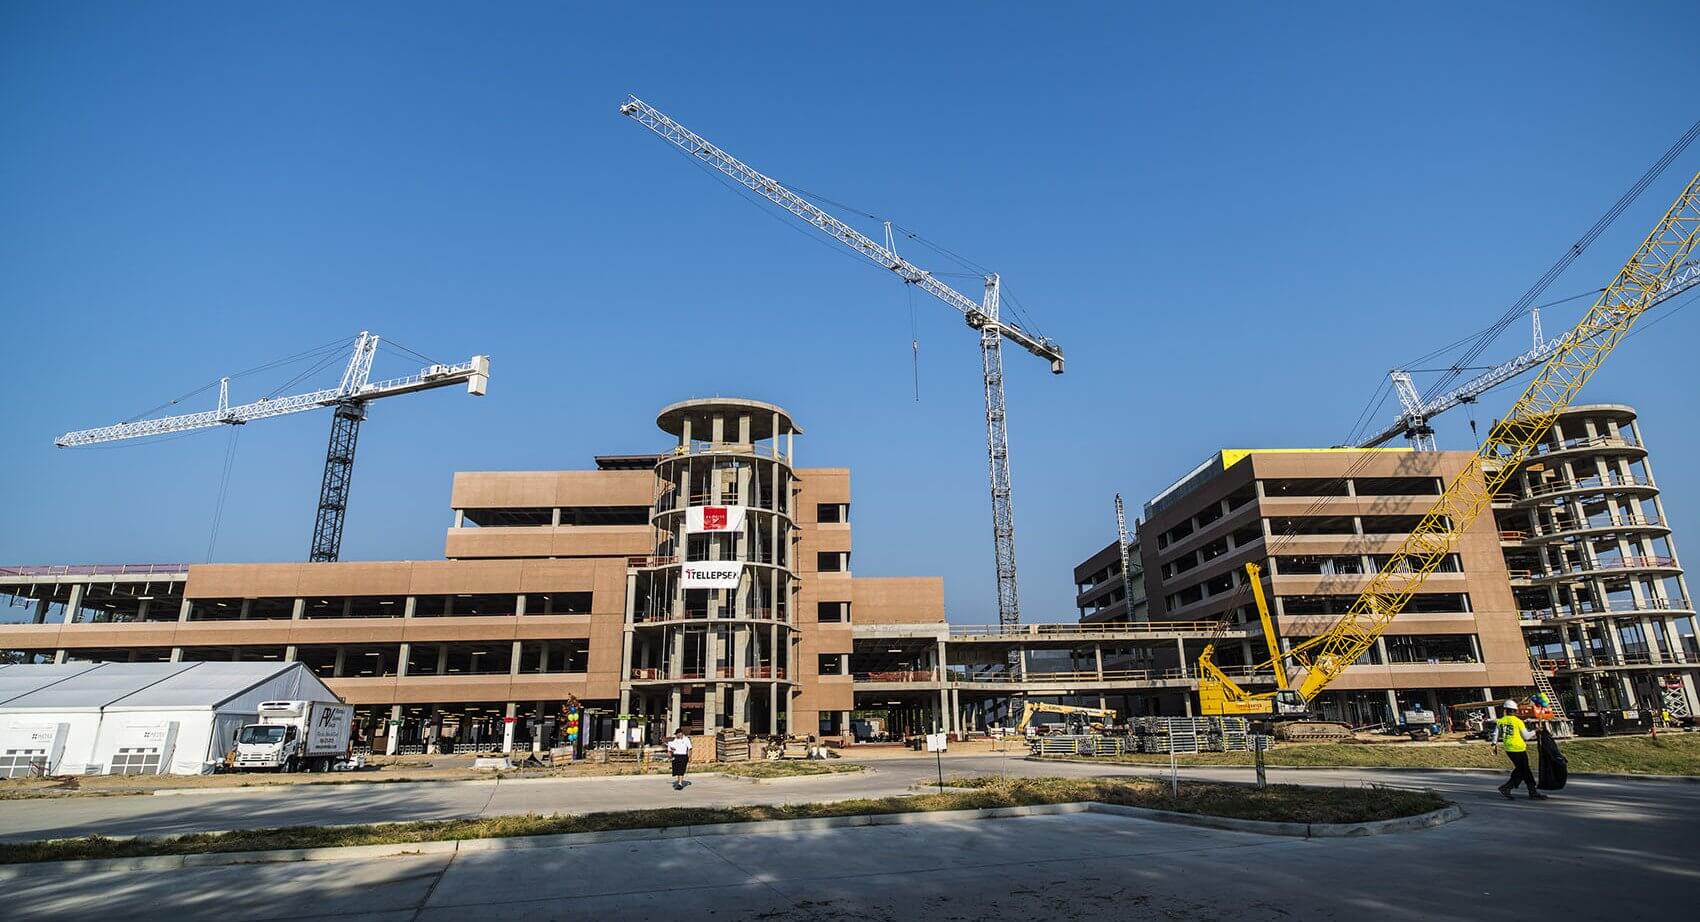 Texas Children’s Hospital and Tellepsen Builders celebrated an exciting construction milestone at Texas Children’s Hospital The Woodlands. (Credit: Allen S. Kramer/Texas Children’s Hospital)